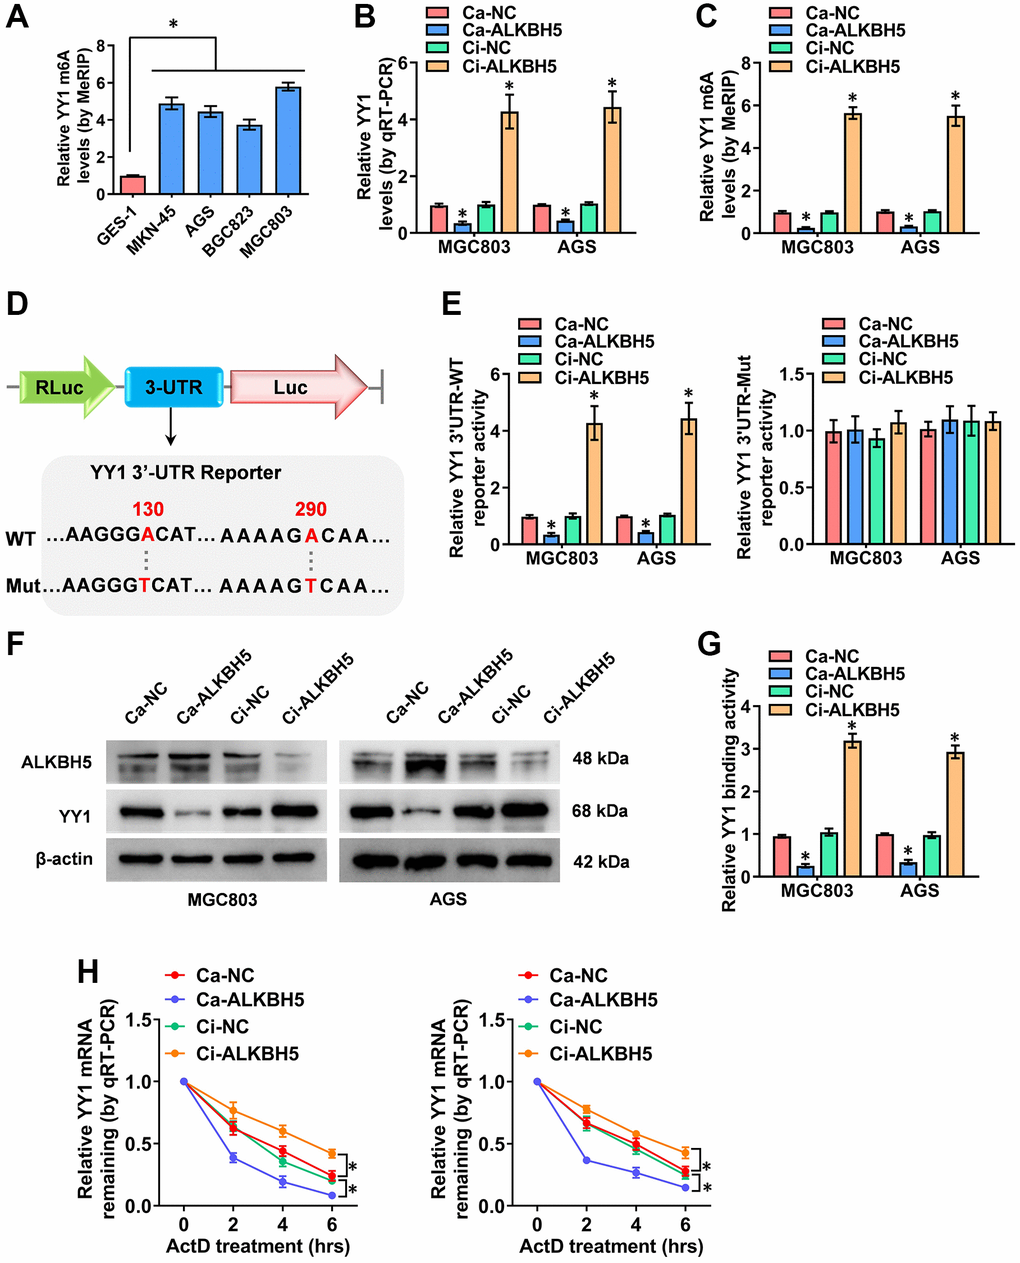 ALKBH5 weakens the m6A levels of YY1 mRNA. (A) MeRIP assay showing the YY1 m6A levels in human GC cell lines compared to GES-1 cells. (B, C) qRT-PCR and MeRIP assays displaying the mRNA and m6A levels in MGC803 and AGS cells induced for the overexpression or knockdown of ALKBH5. (D) Schematic illustration showing the m6A modification site (AAGGGA, AAAAGA) at position of 130 and 290 base on the YY1 3’-UTR from SRAMP Browser, and the wild-type (WT) or mutation (Mut) of YY1 3’-UTR reporters were designed (m6A was replaced by T). (E, F) Dual-luciferase and Western blot assays revealing the 3’-UTR activity and protein levels of YY1 in GC cells stably transfected with Ca-NC, Ca-ALKBH5, Ci-NC or Ci-ALKBH5. (G, H) Dual-luciferase and qRT-PCR assays showing the binding activity and mRNA half-life of YY1 in GC cells stably transfected with Ca-NC, Ca-ALKBH5, Ci-NC or Ci-ALKBH5. *P 